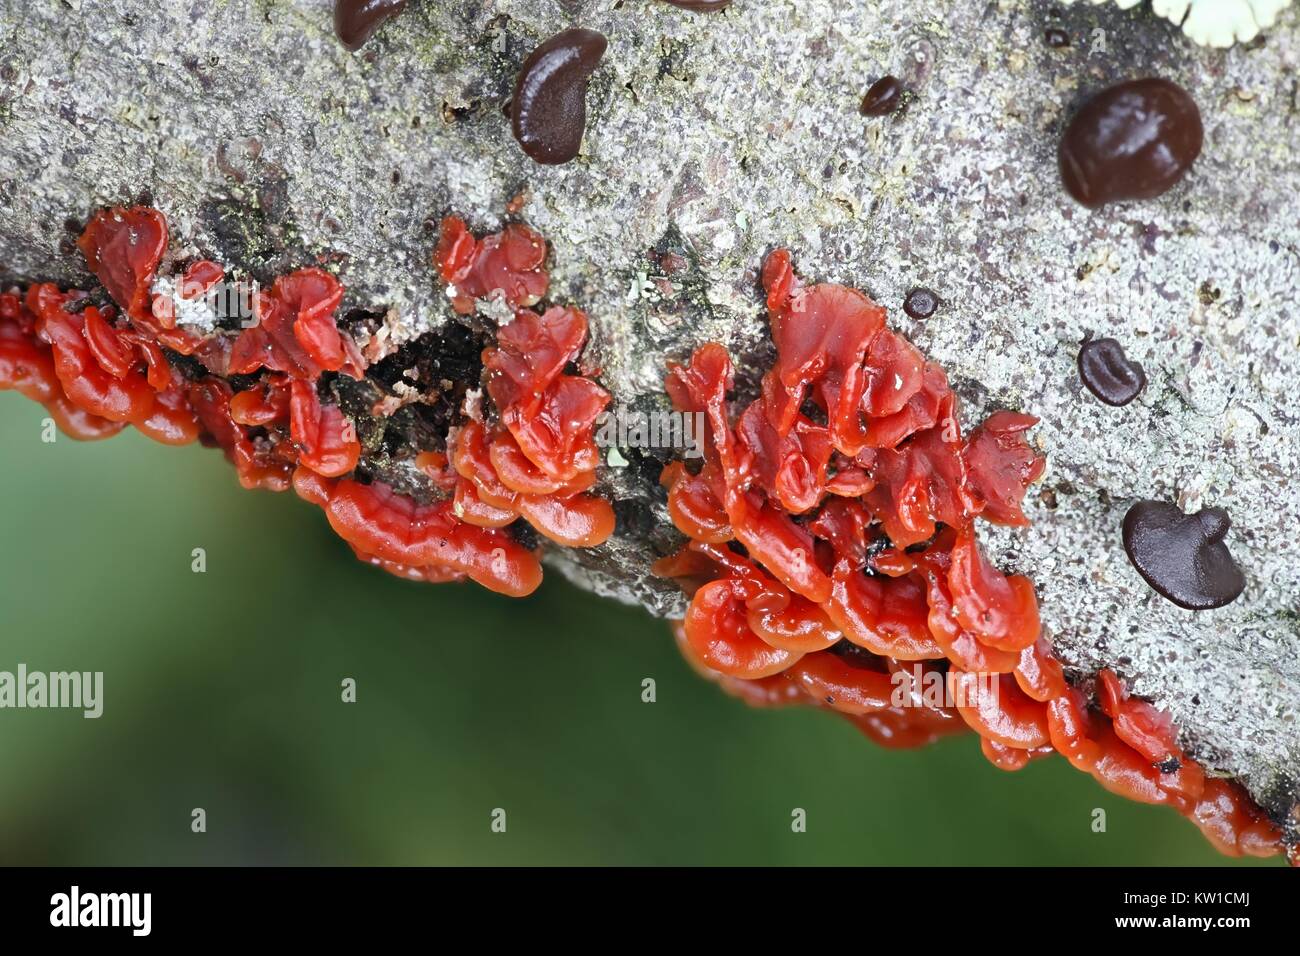 Scarlet splash, Cytidia salicina, growing on willow in Finland Stock Photo